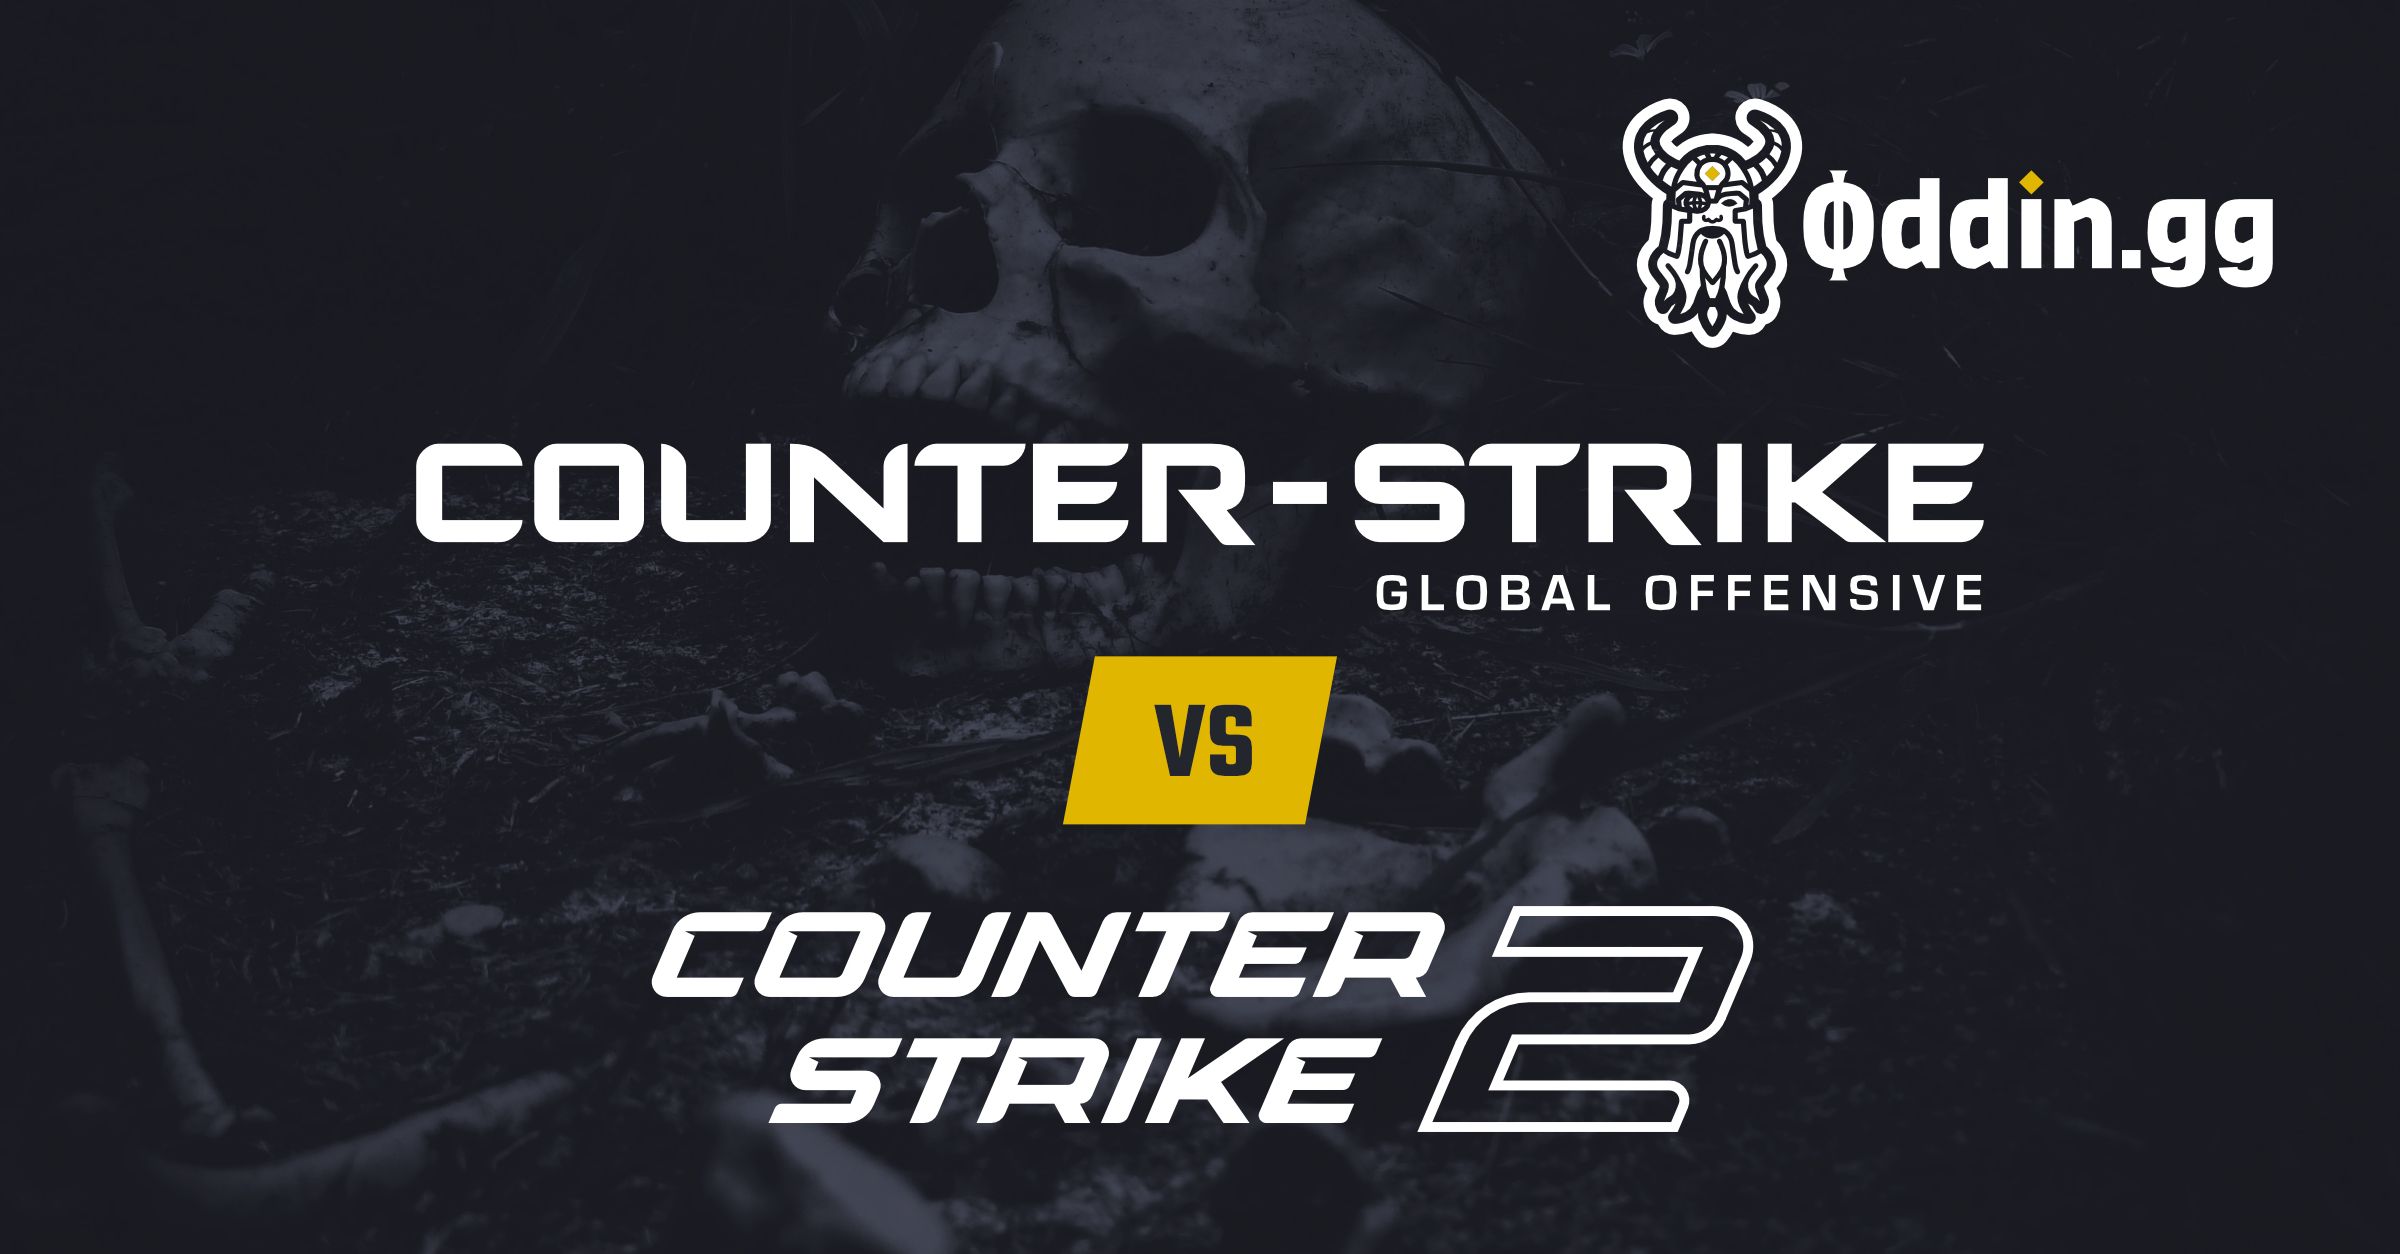 CS:GO' update suggests 'Counter-Strike 2' launch is imminent